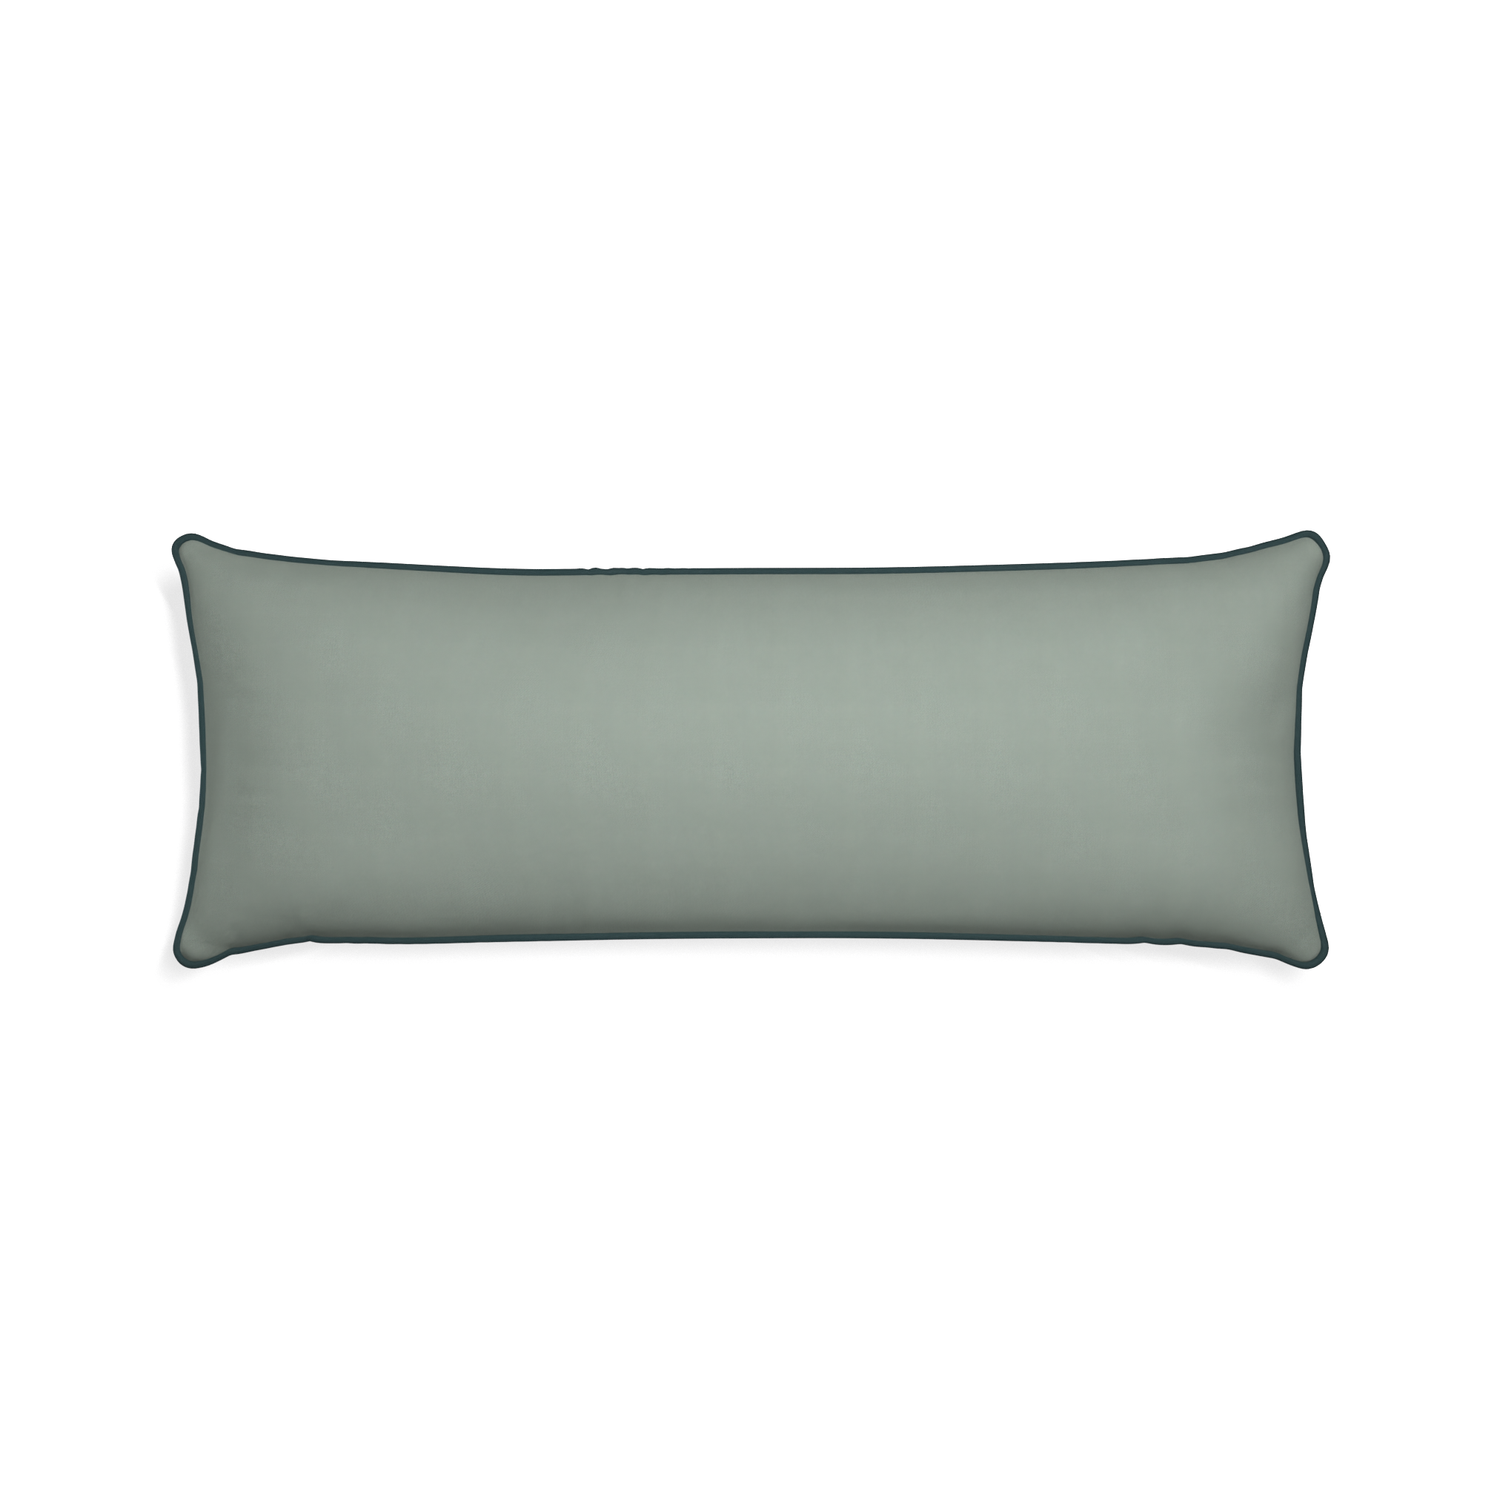 Xl-lumbar sage custom sage green cottonpillow with p piping on white background